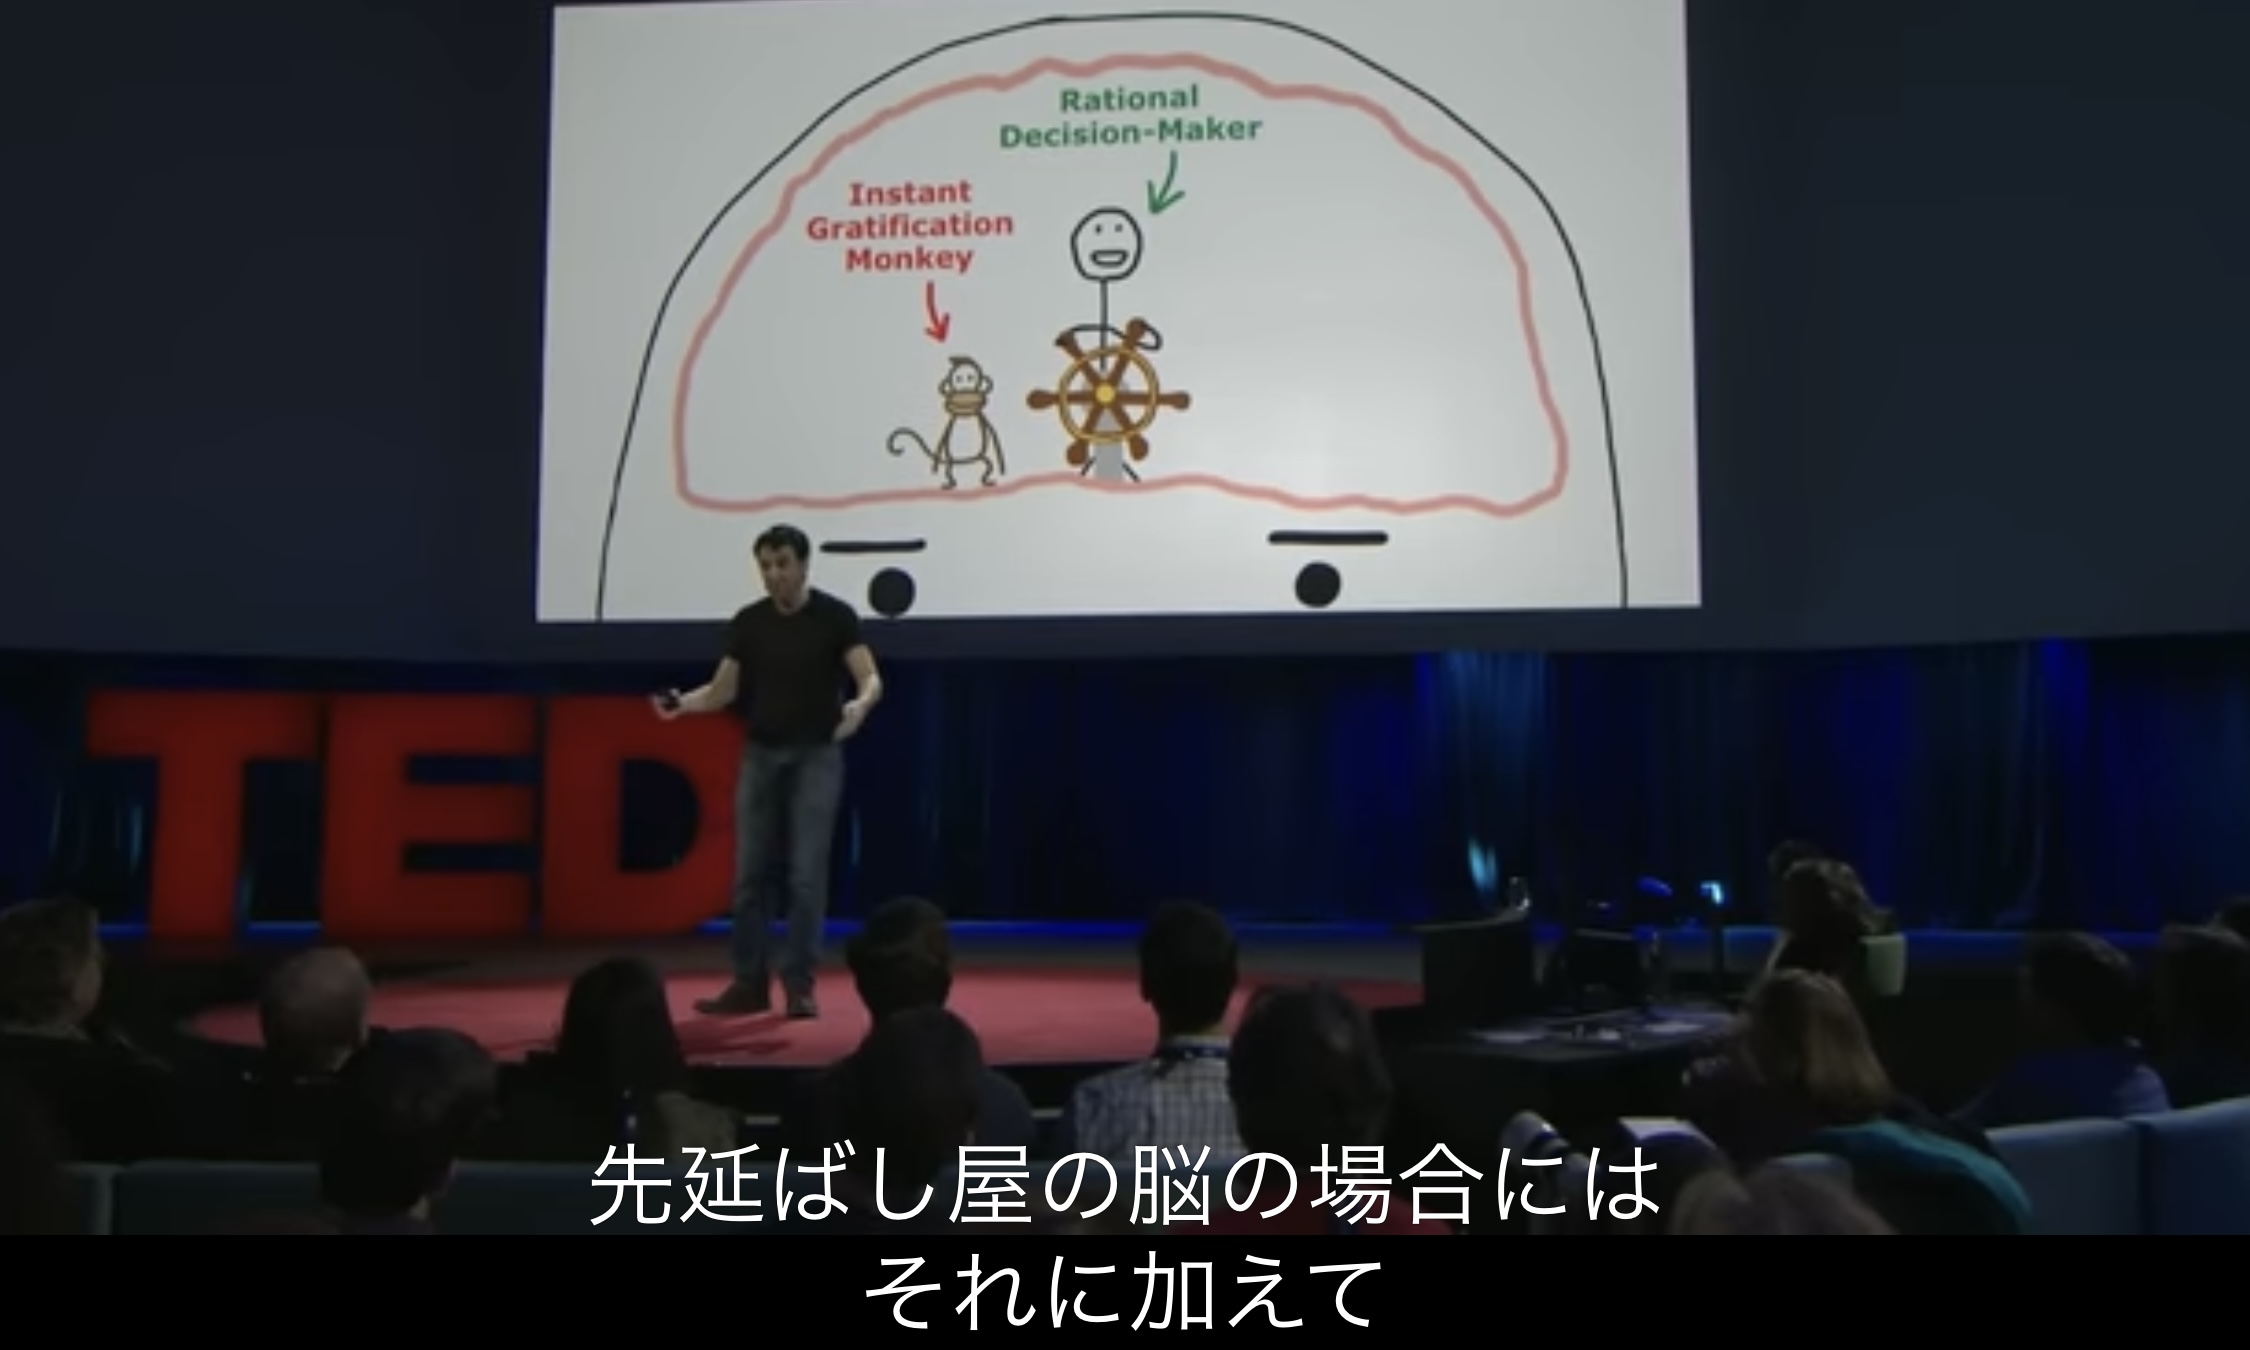 TED 英語